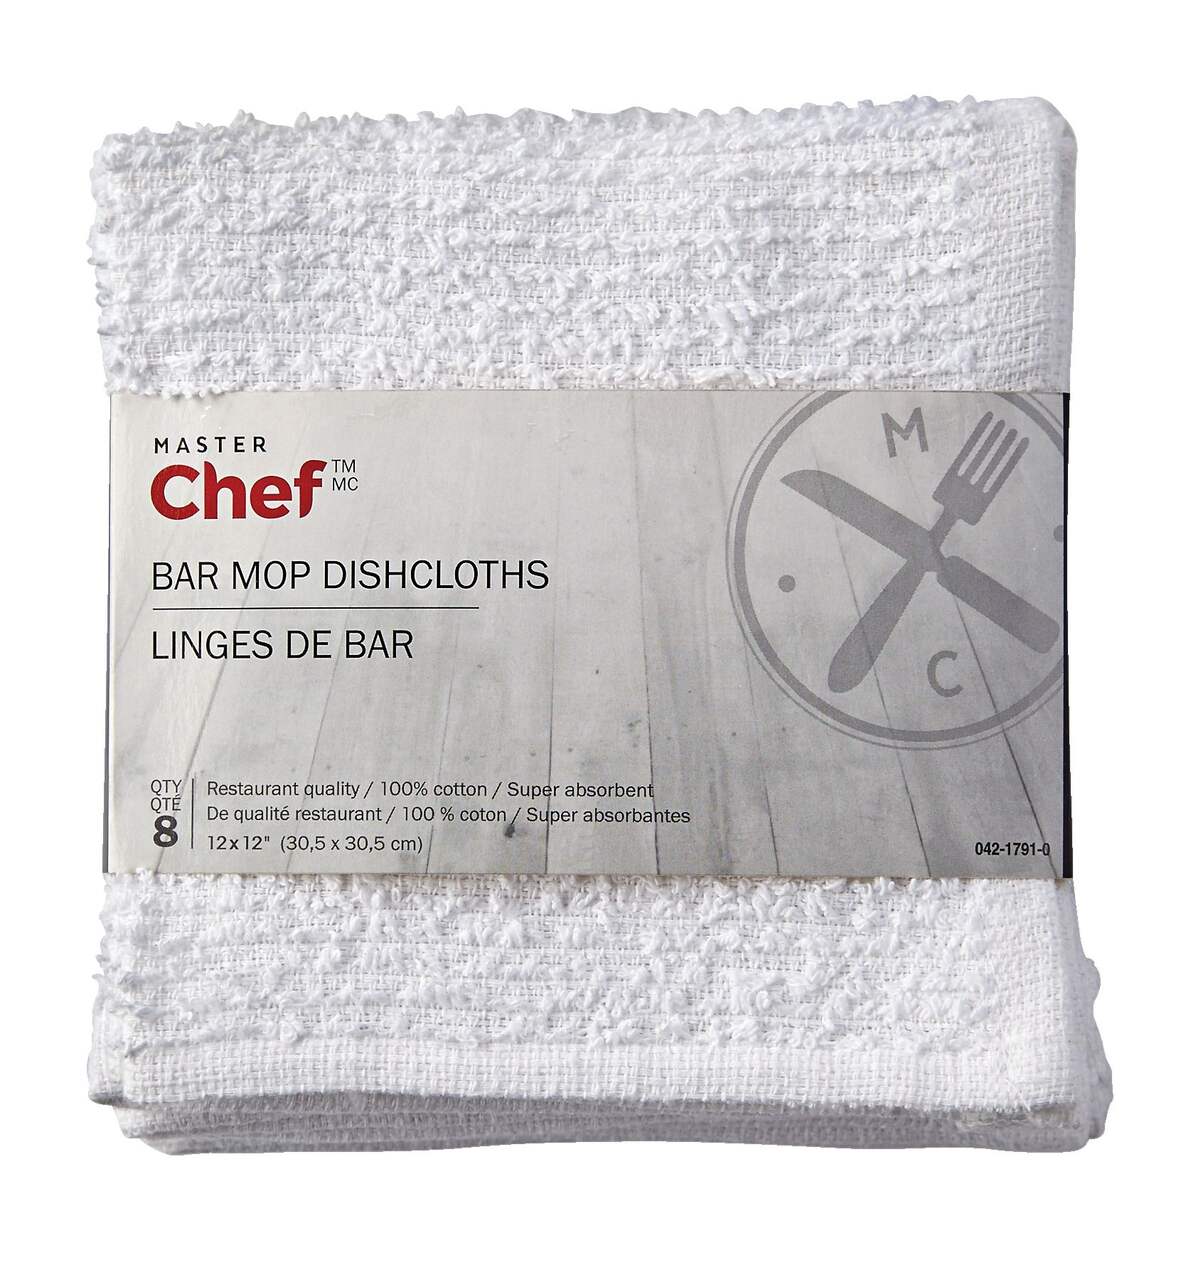 https://media-www.canadiantire.ca/product/living/kitchen/dining-and-entertaining/0421791/masterchef-8-pack-barmops-1521f12a-09f9-4612-96ee-20561dbe4295-jpgrendition.jpg?imdensity=1&imwidth=640&impolicy=mZoom